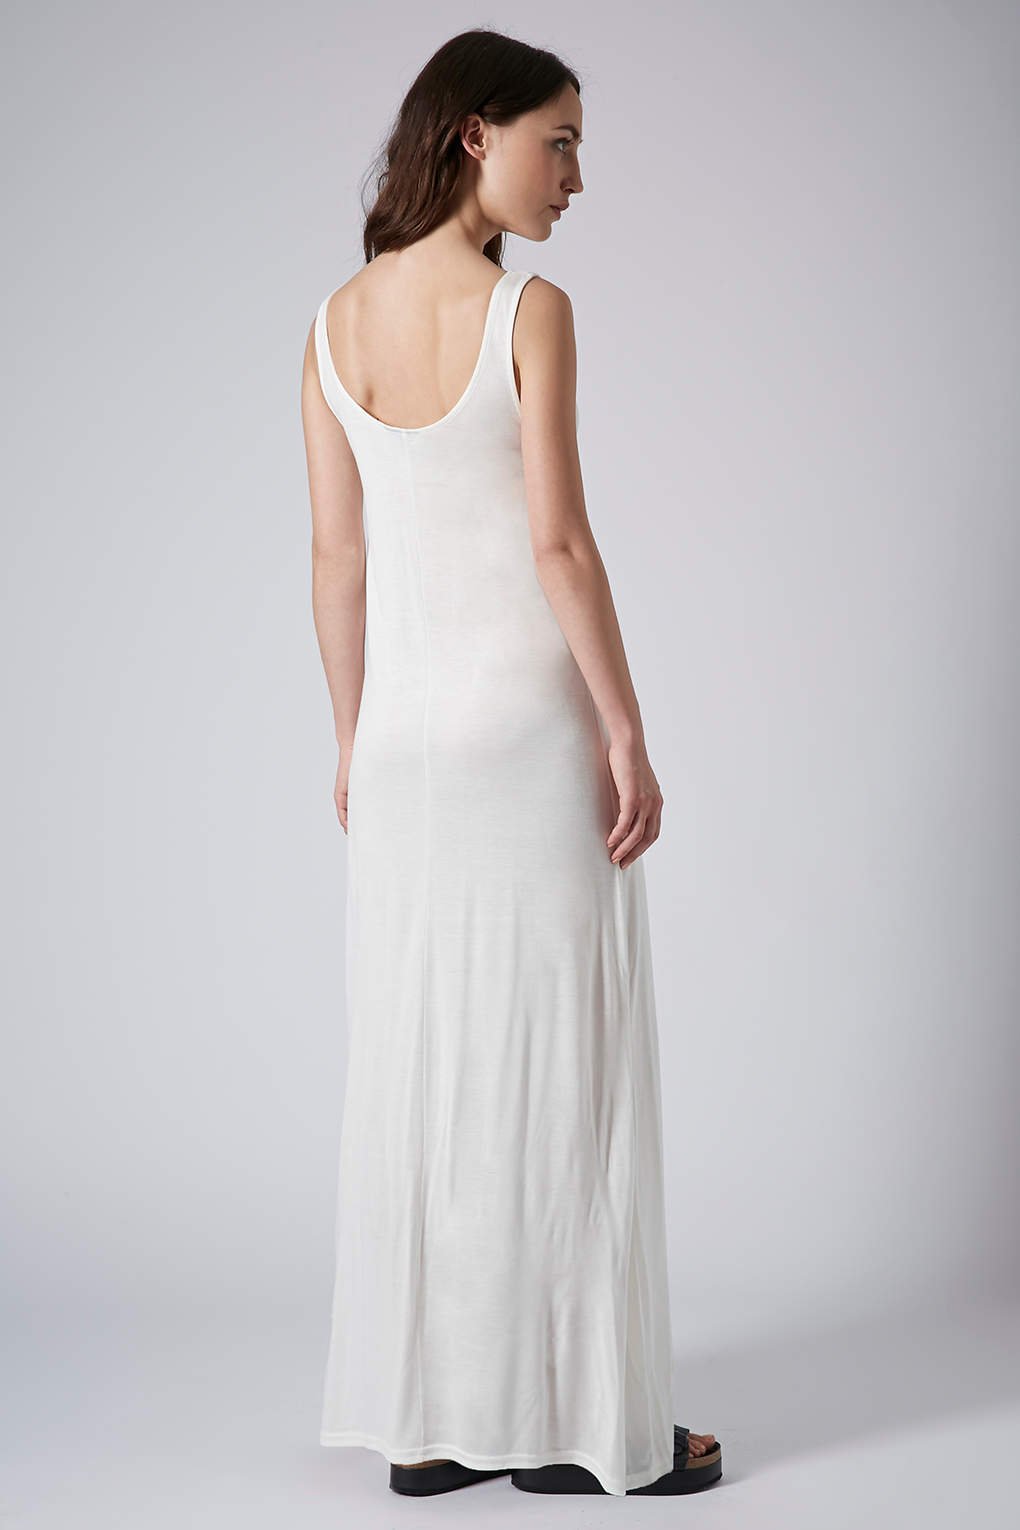 Lyst - Topshop Plain Low Back Maxi Dress in White